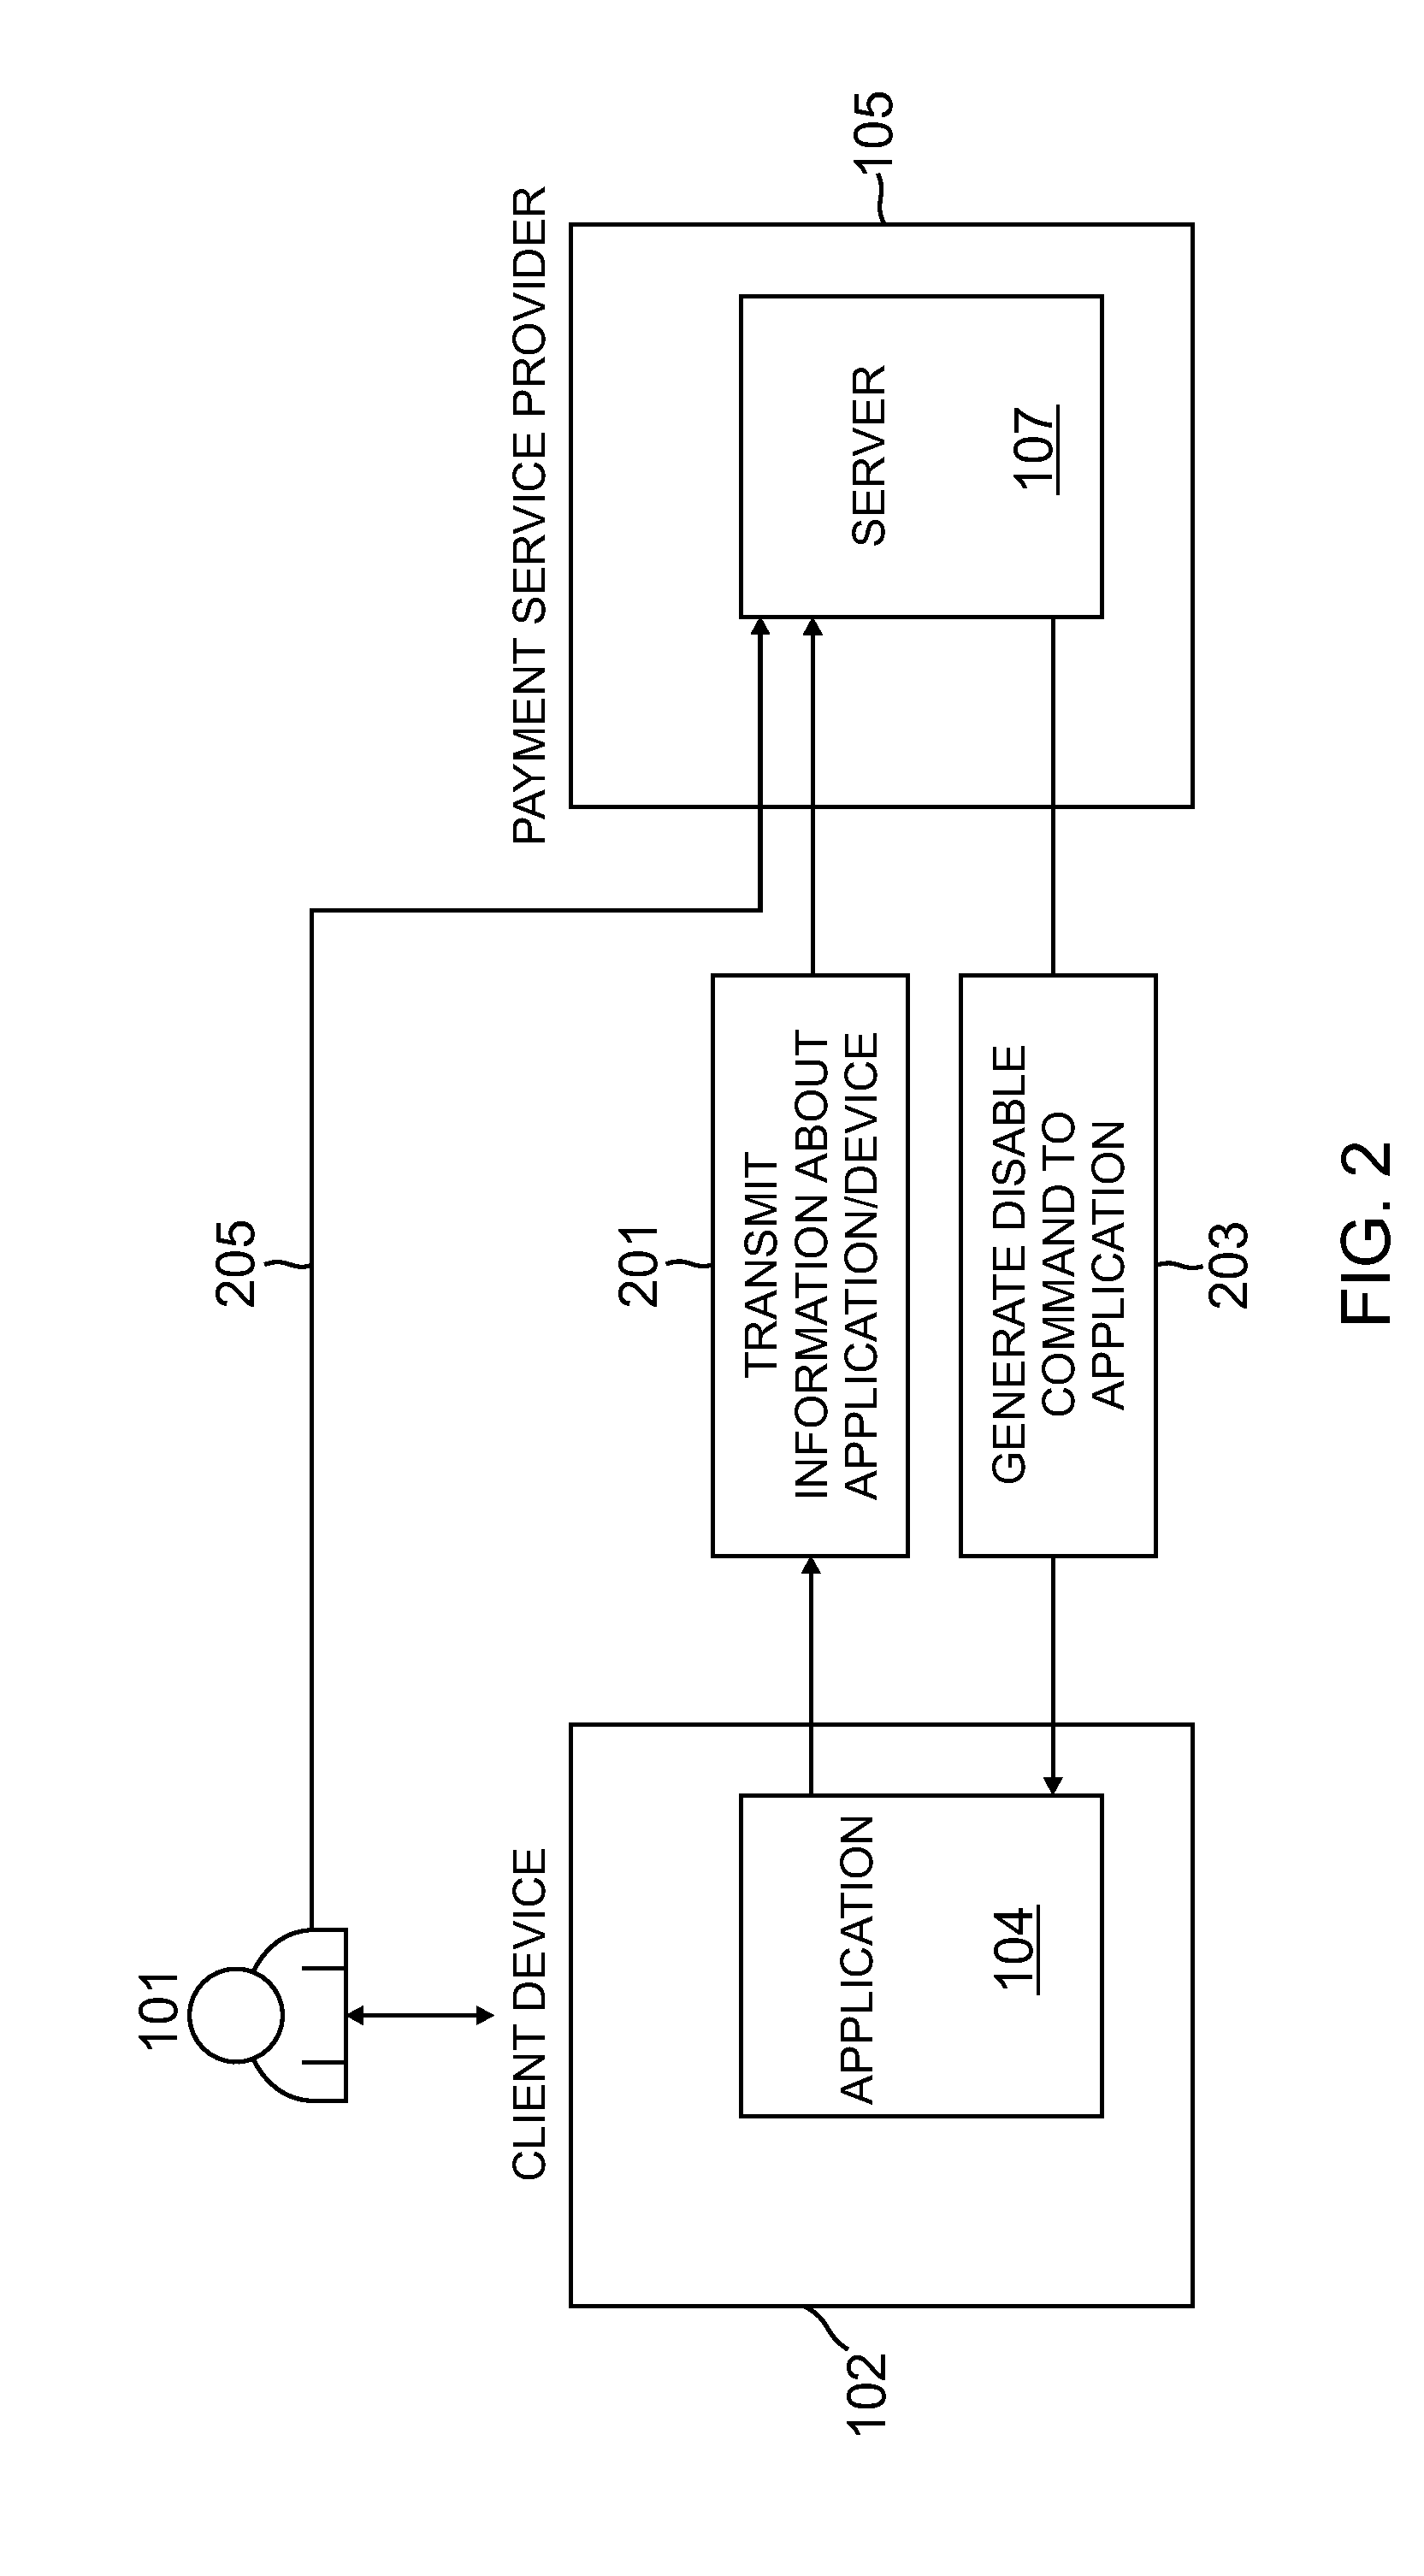 Device specific remote disabling of applications